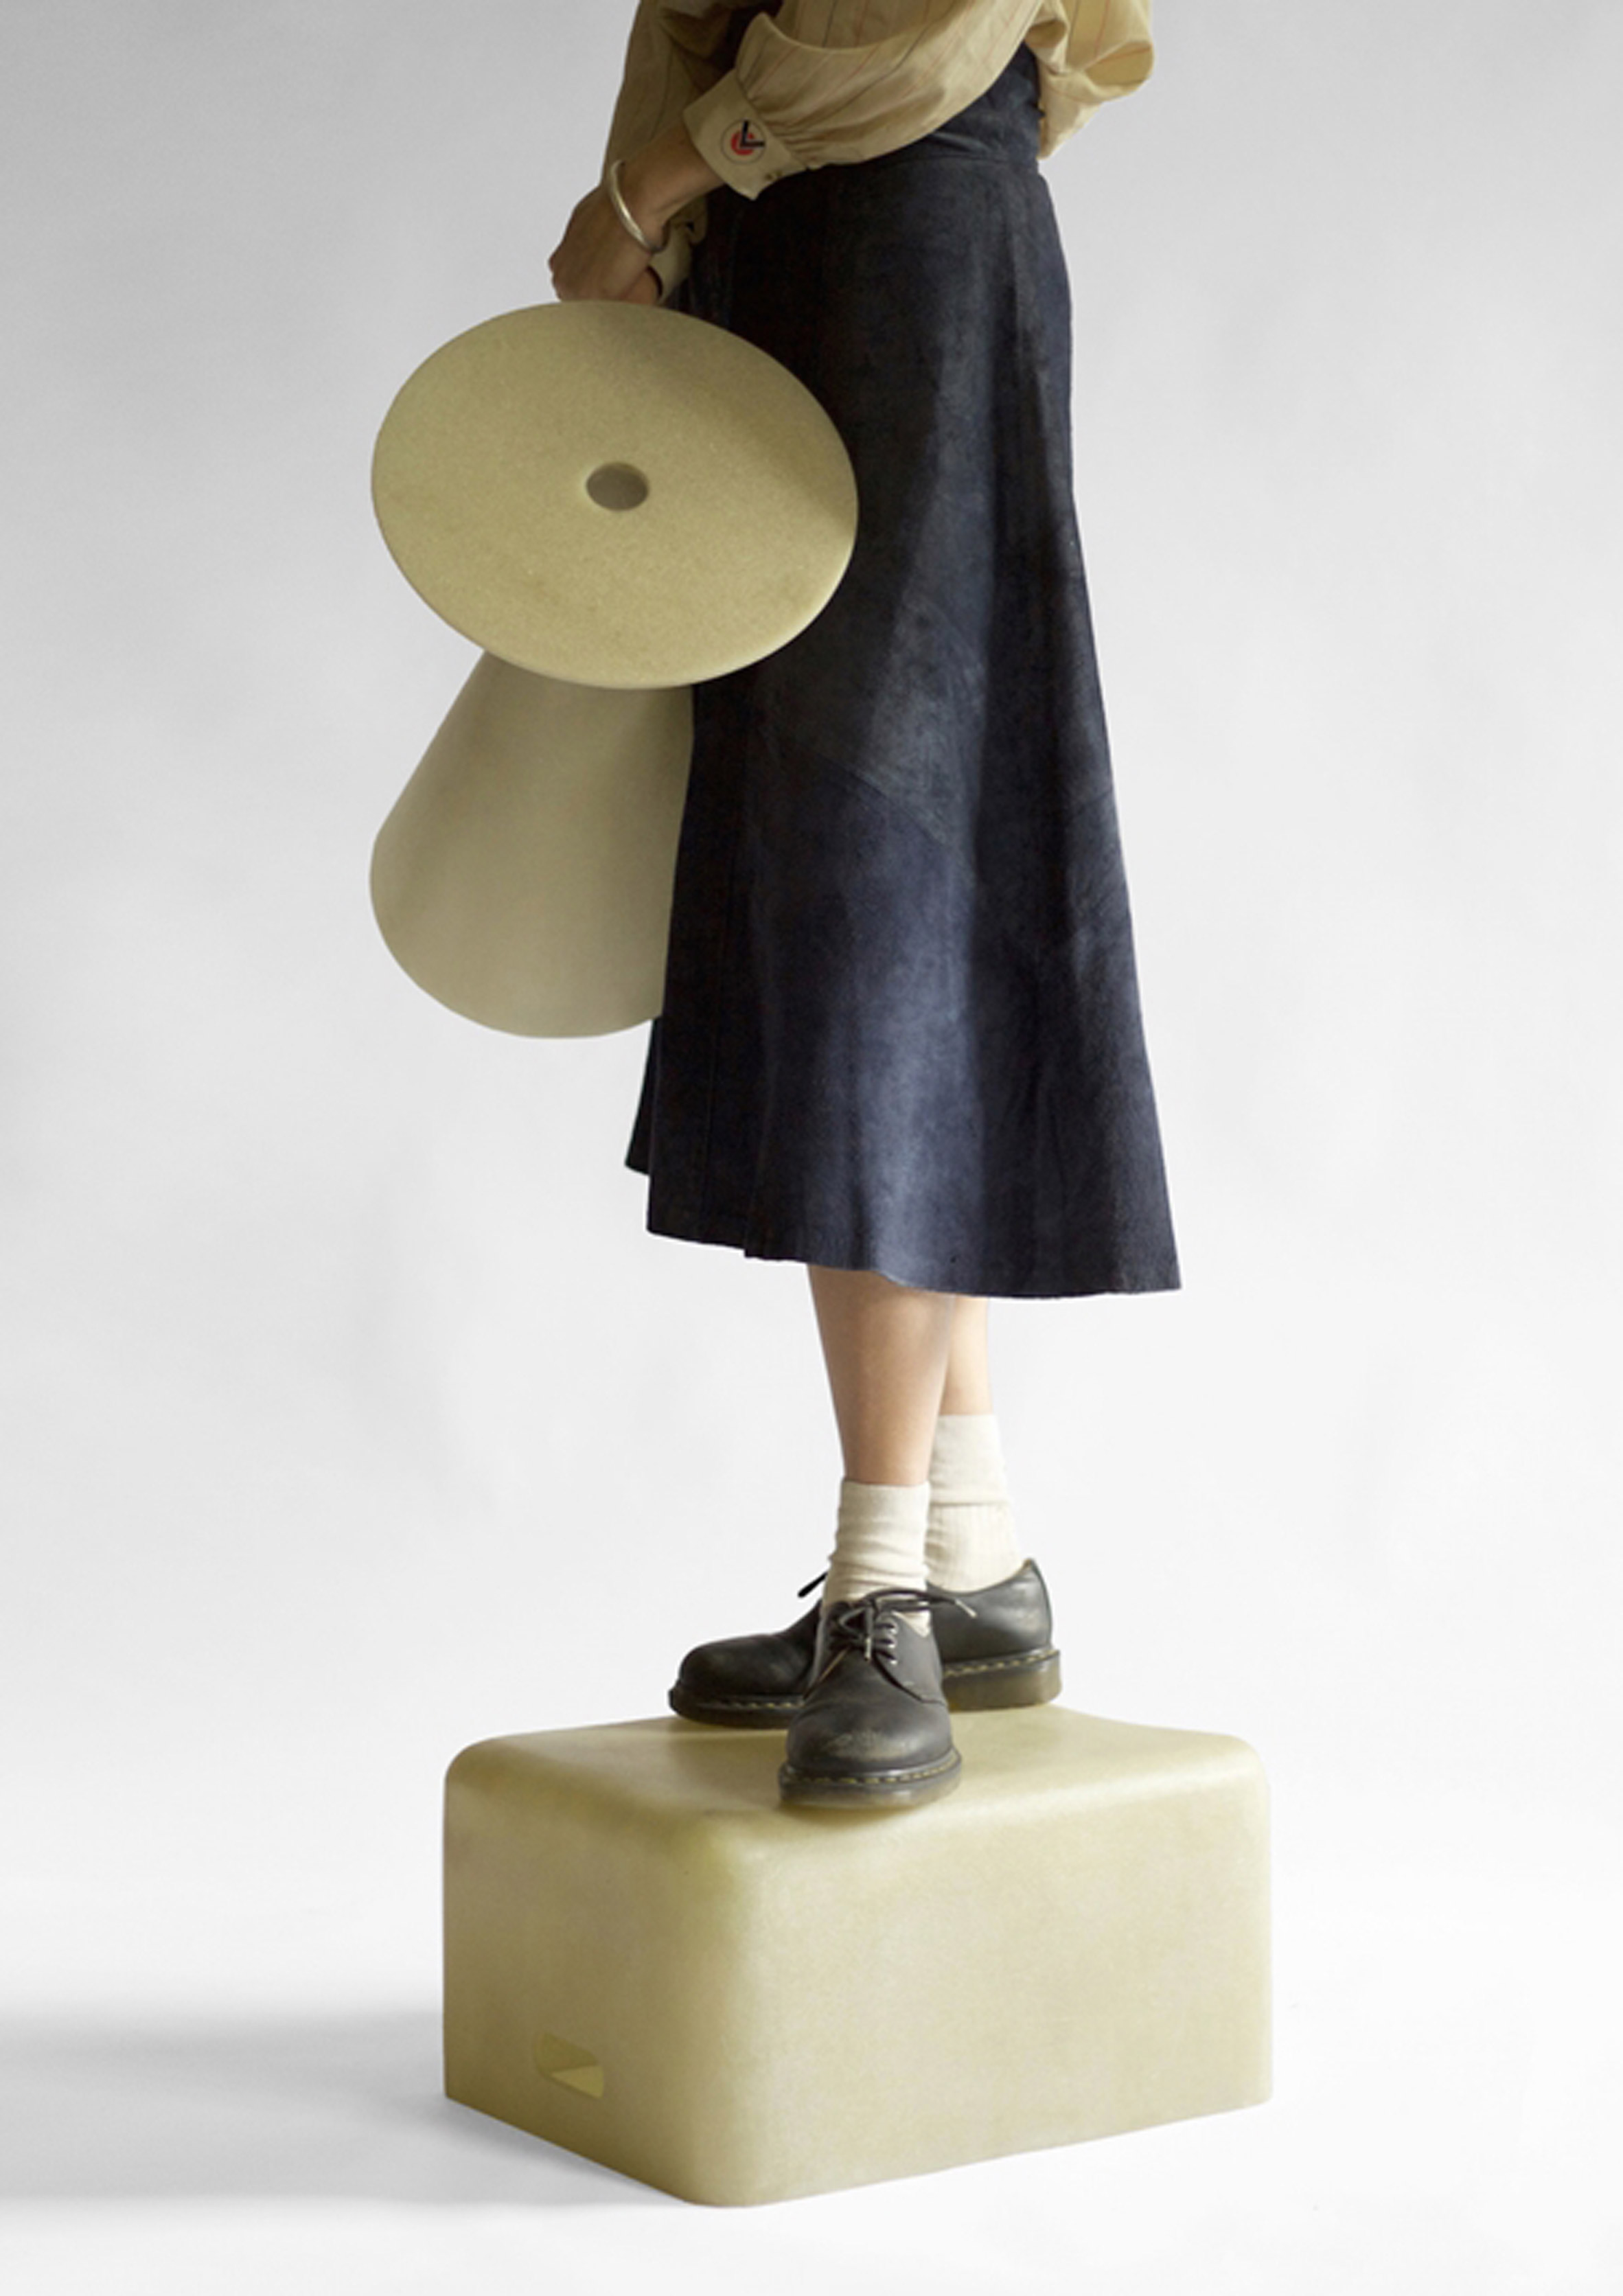 Poppy Booth creates megaphone for introverts and soapbox for nihilists